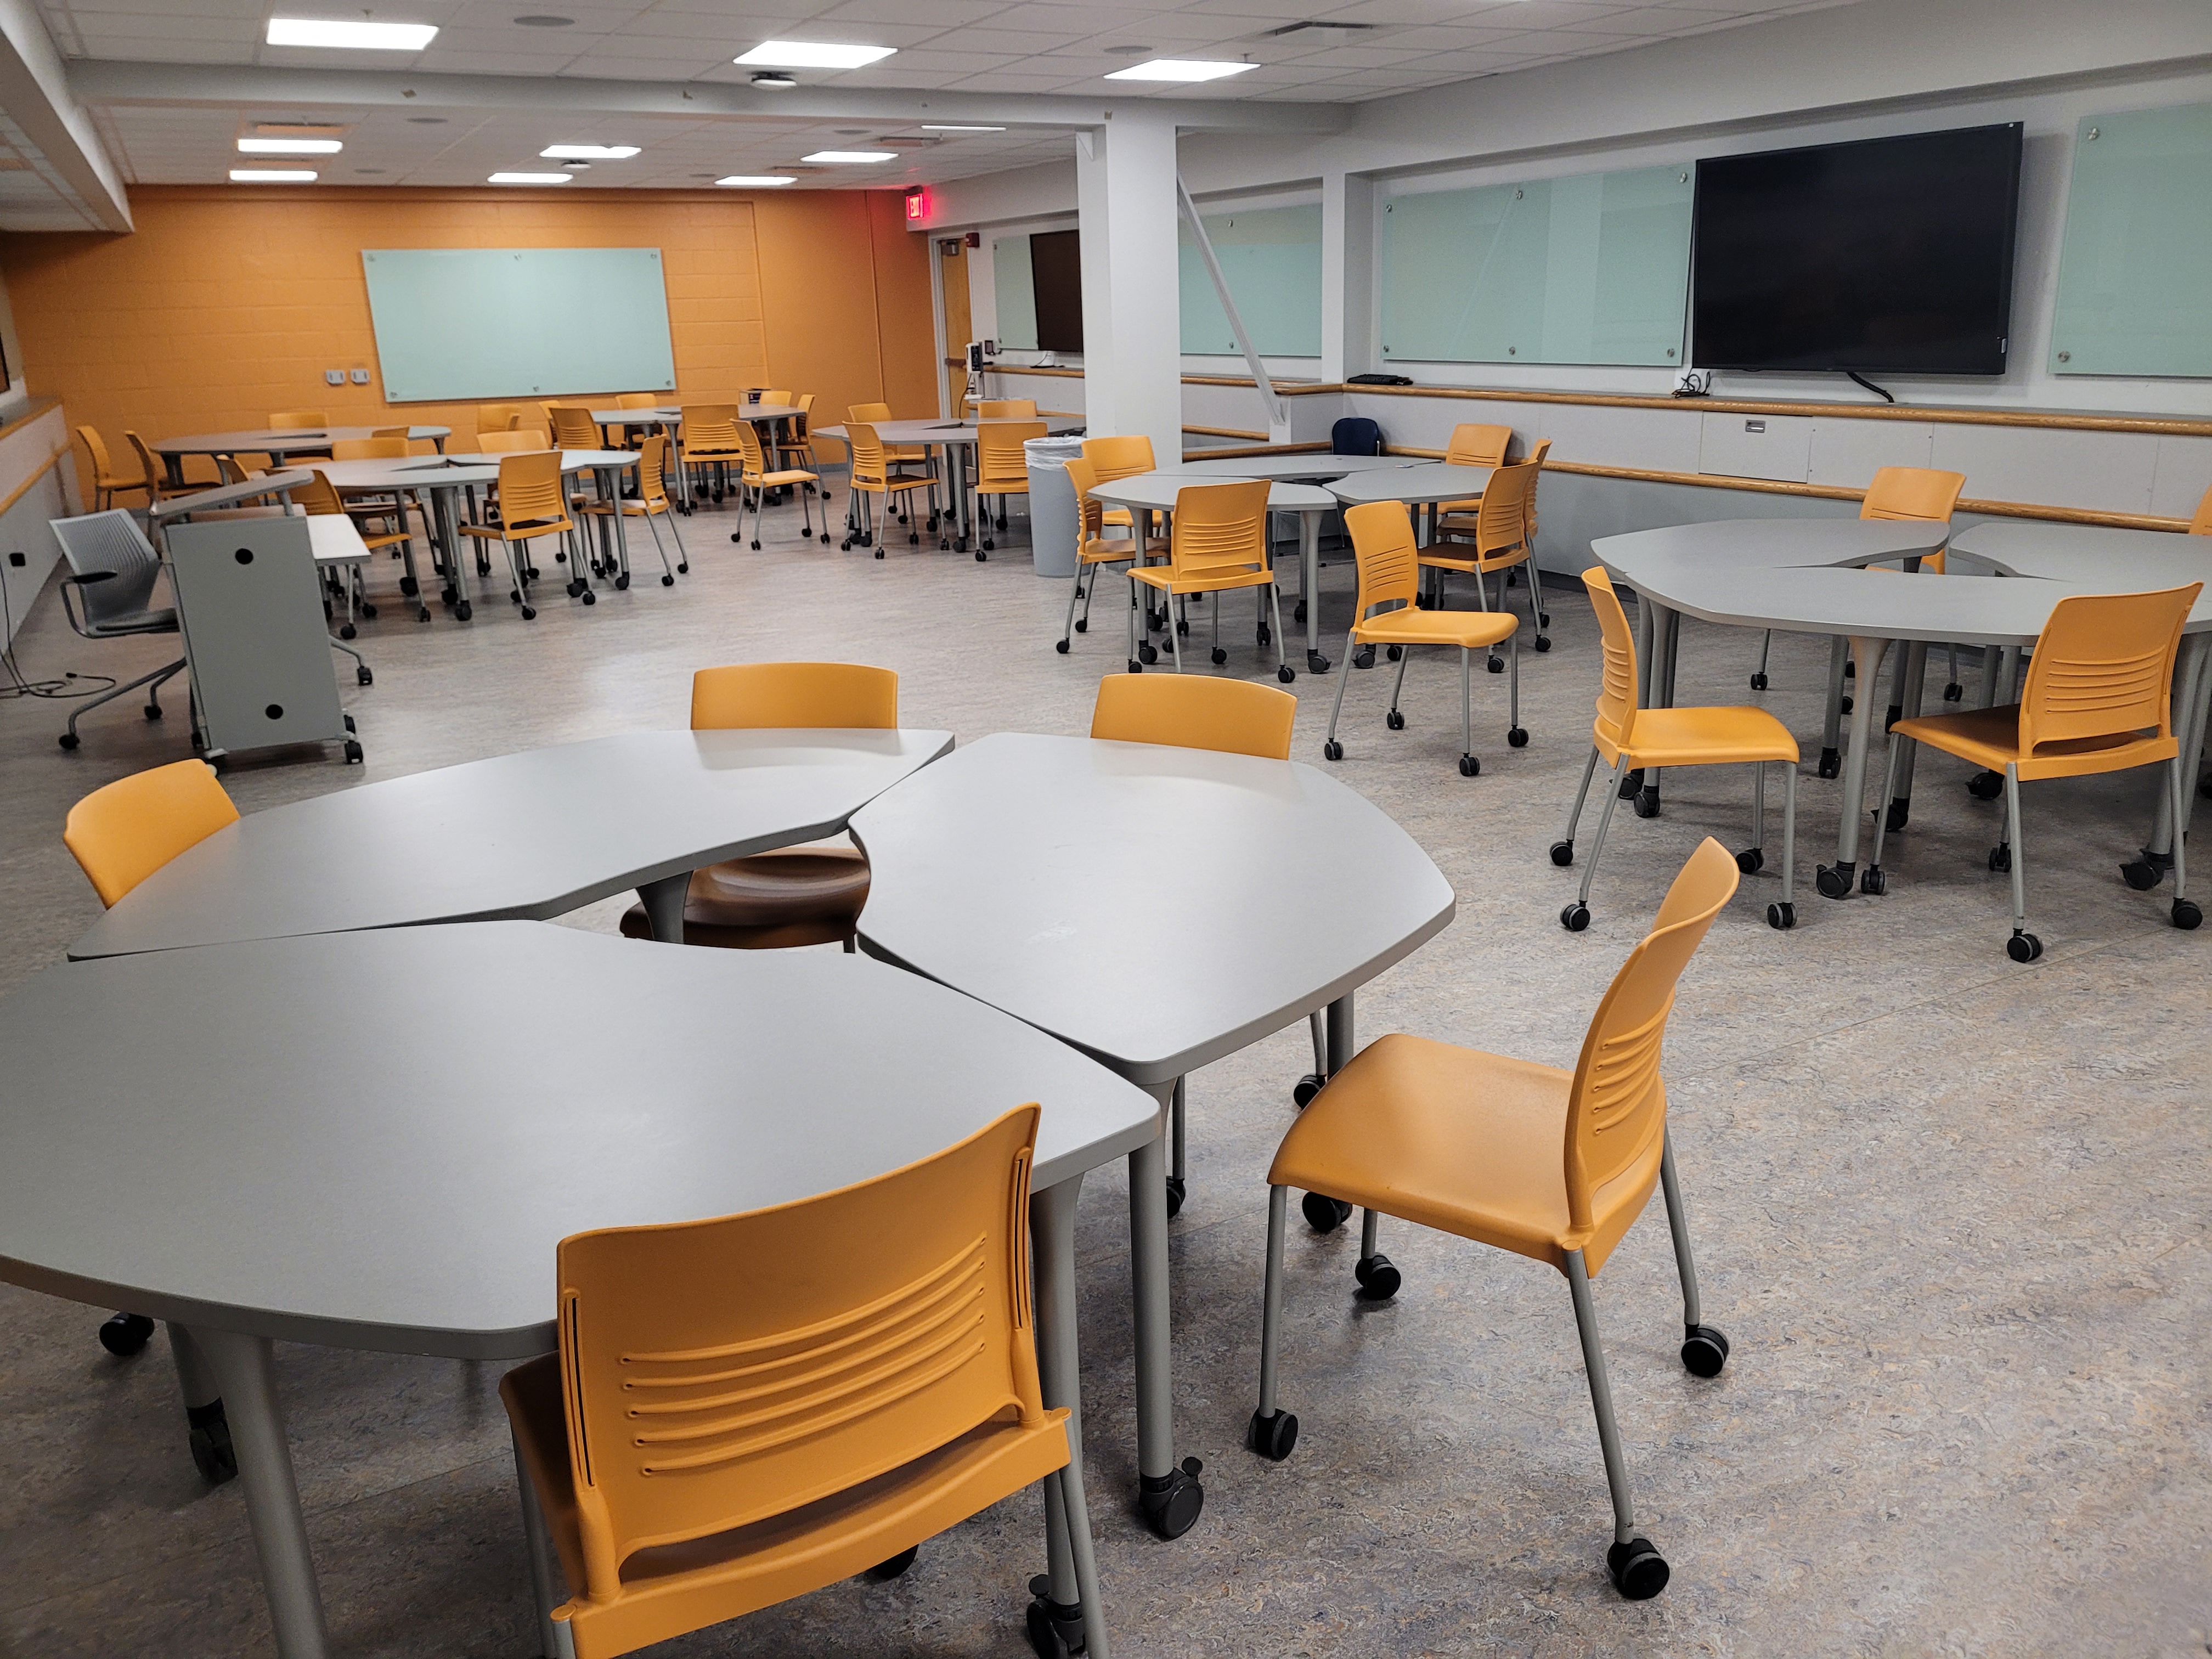 A view of the classroom with movable tables and chairs, multiple monitors, and multiple control panels mounted on the walls.